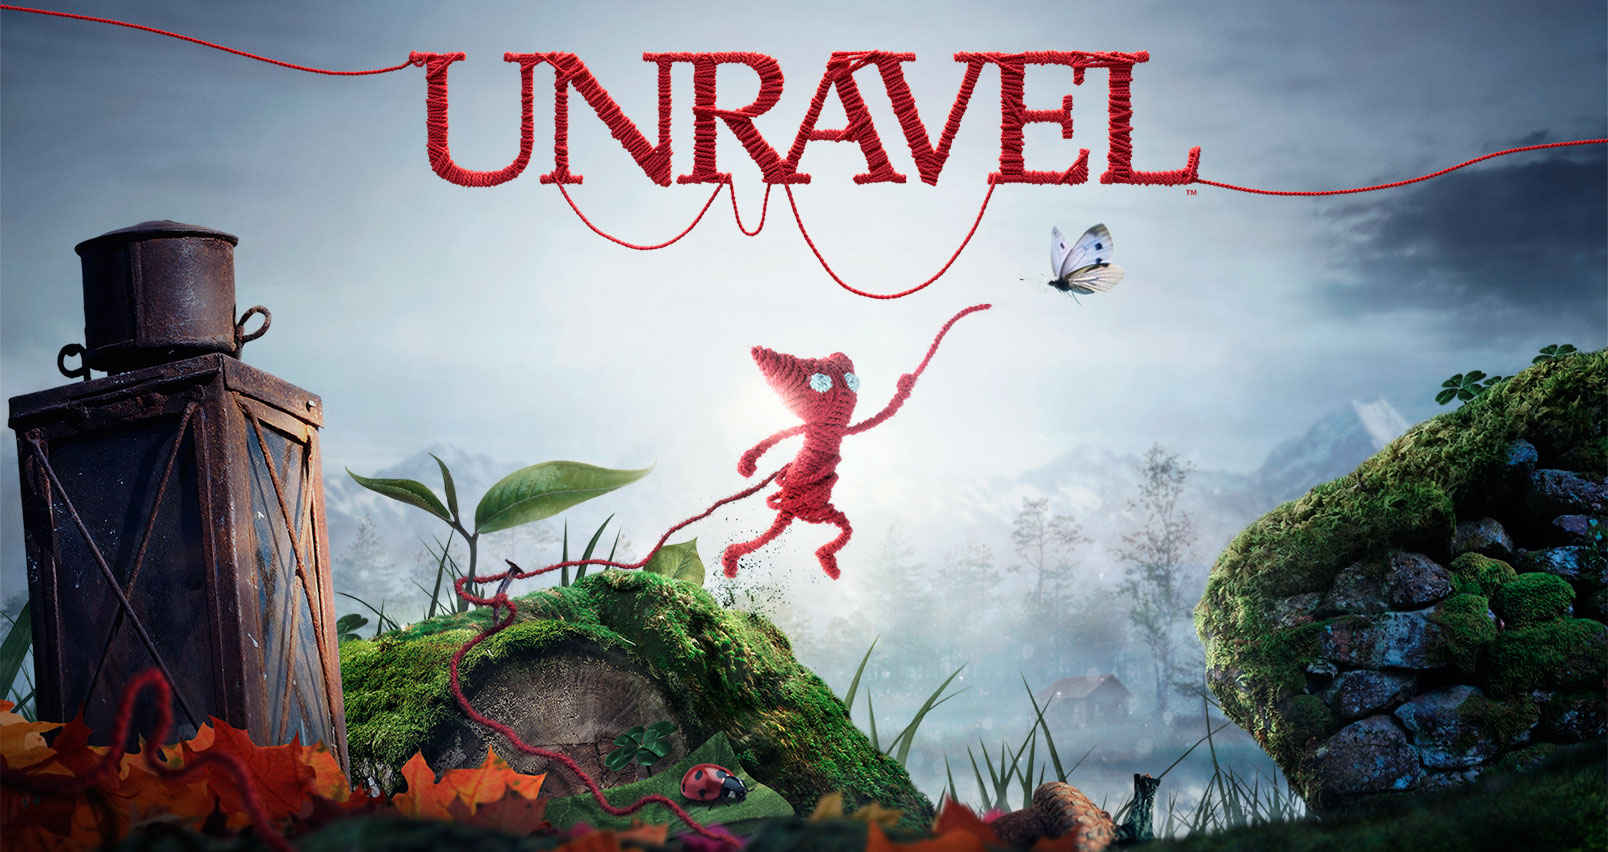 Buy Unravel Two key